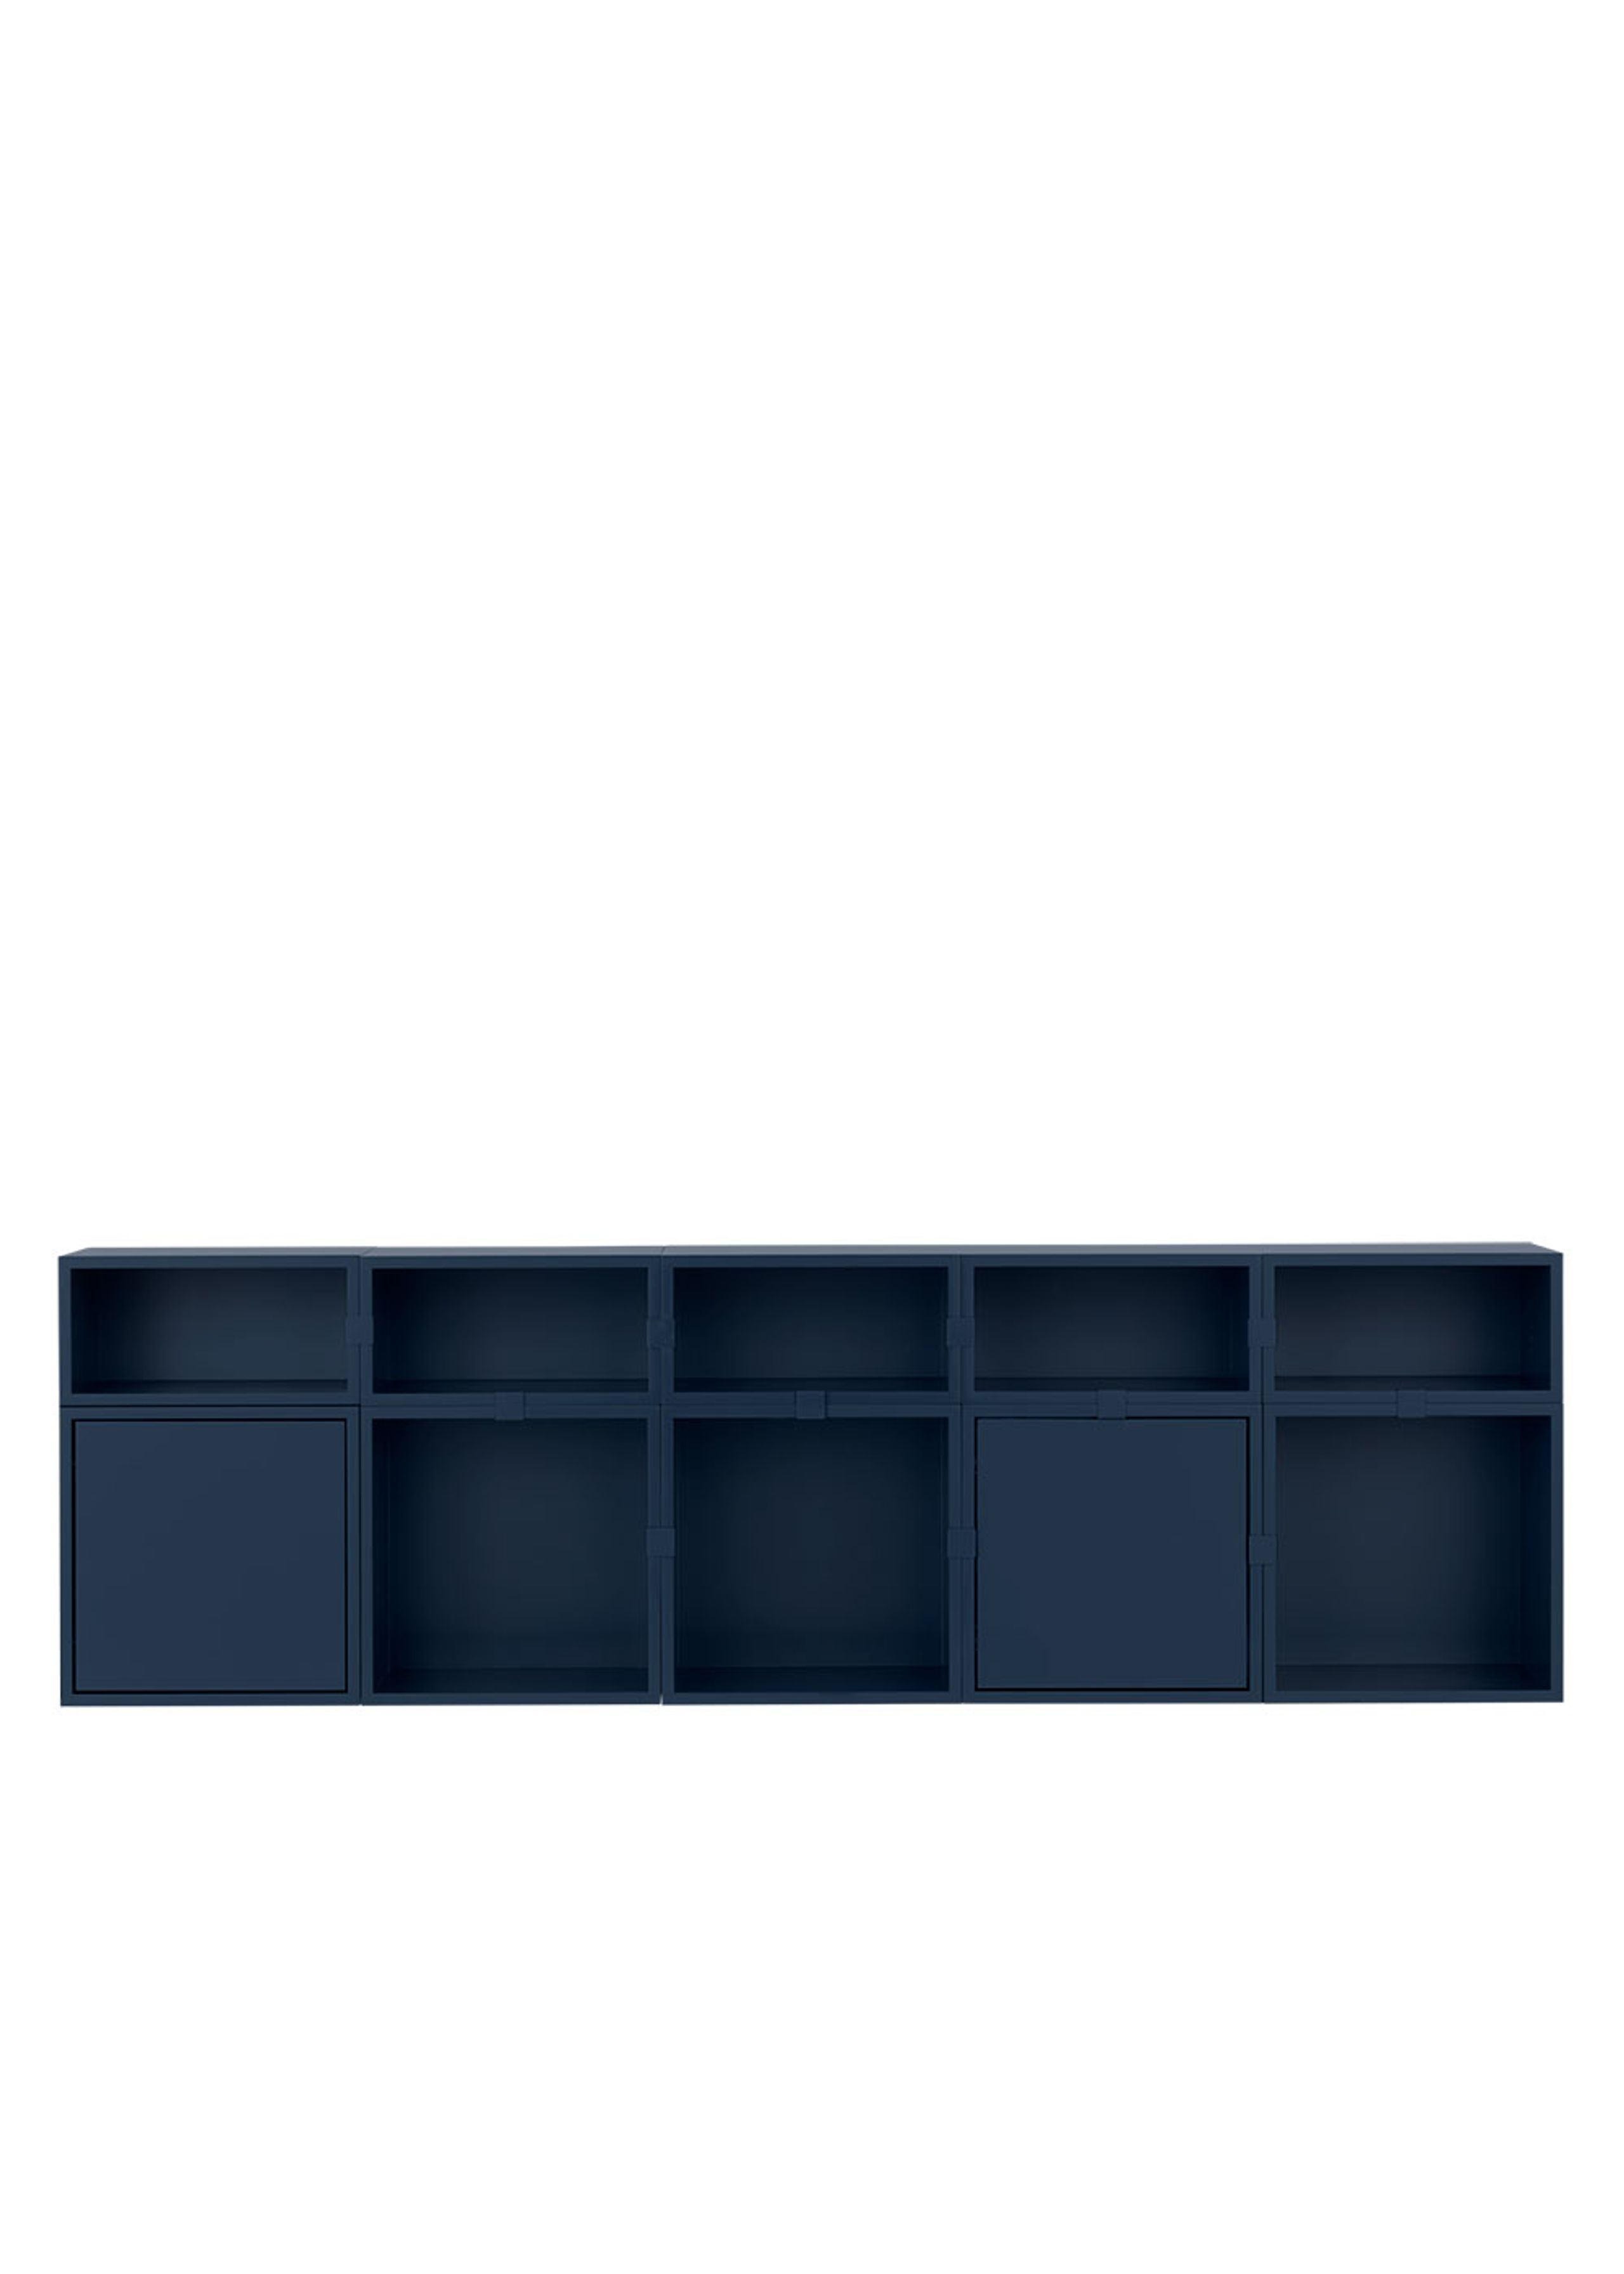 Muuto - Reol - Stacked Storage System - Configuration 8 Version 1